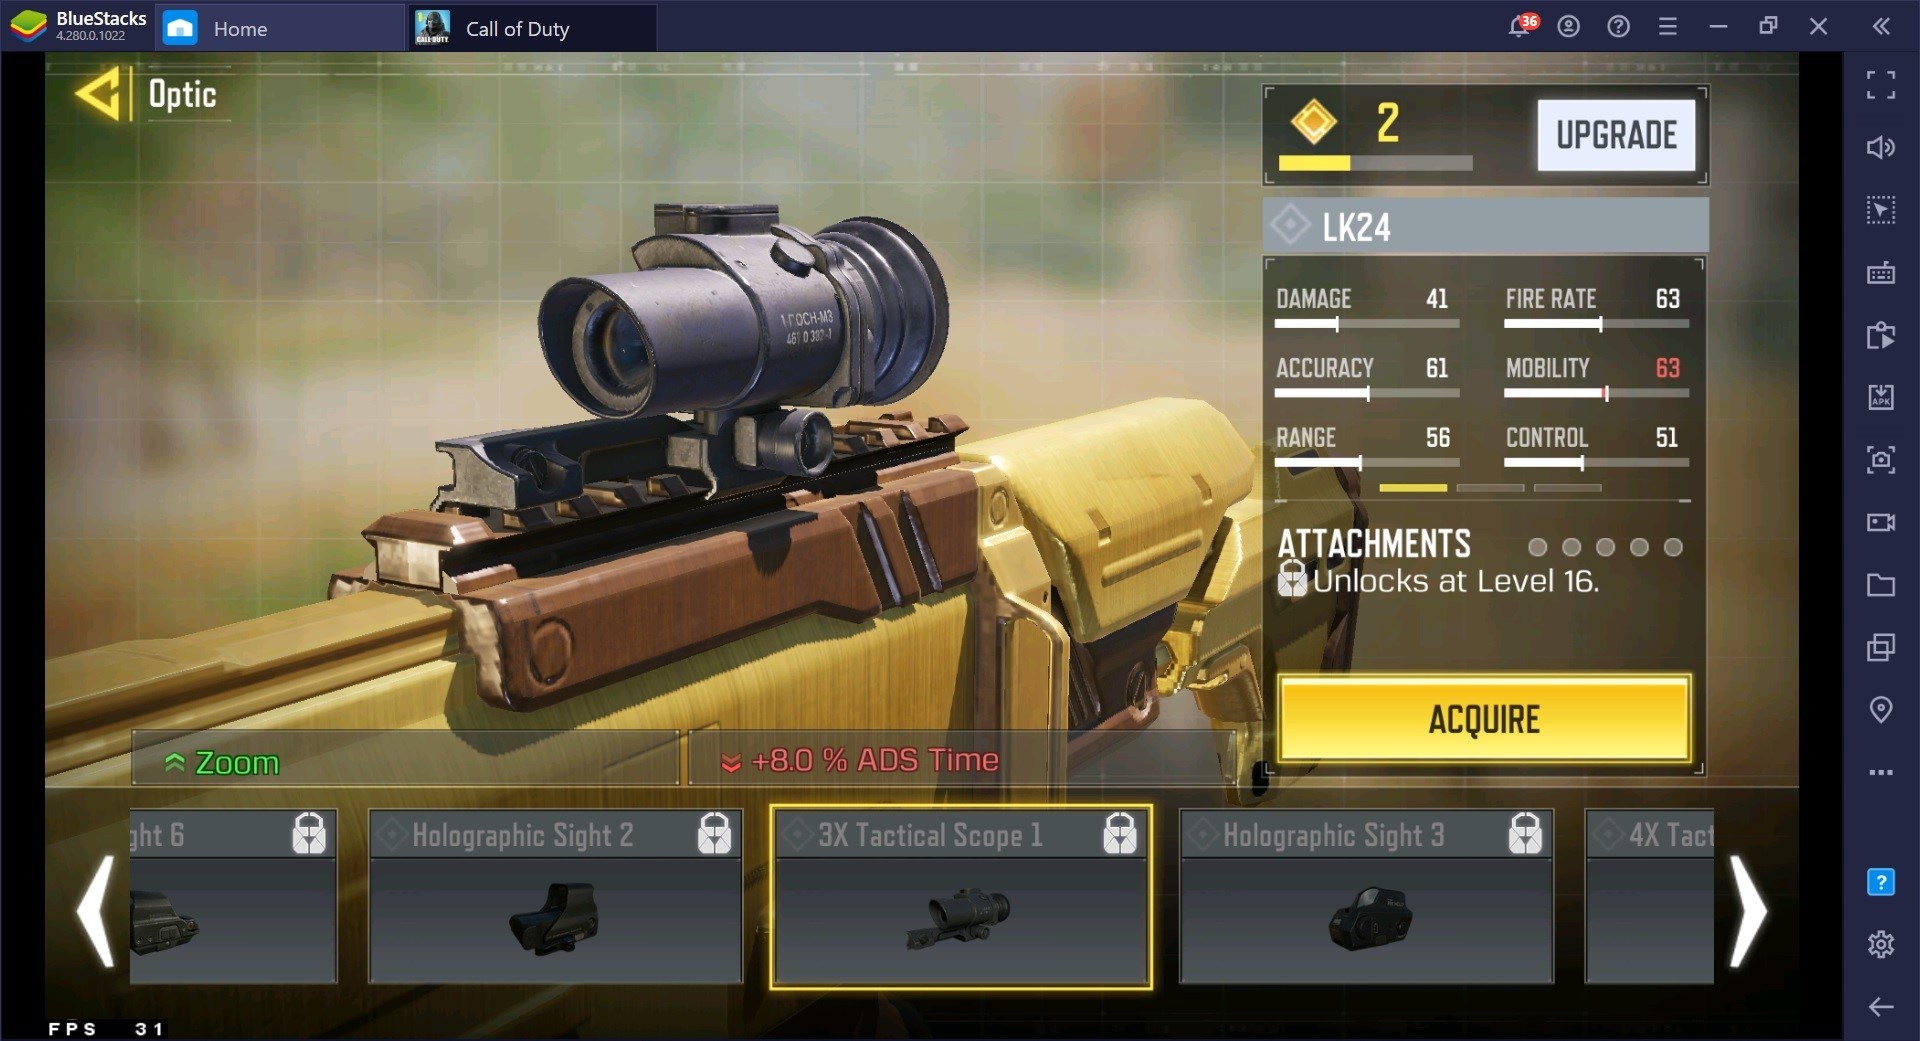 Call of Duty: Mobile Weapon Guide - It's Time to Reconsider the LK24